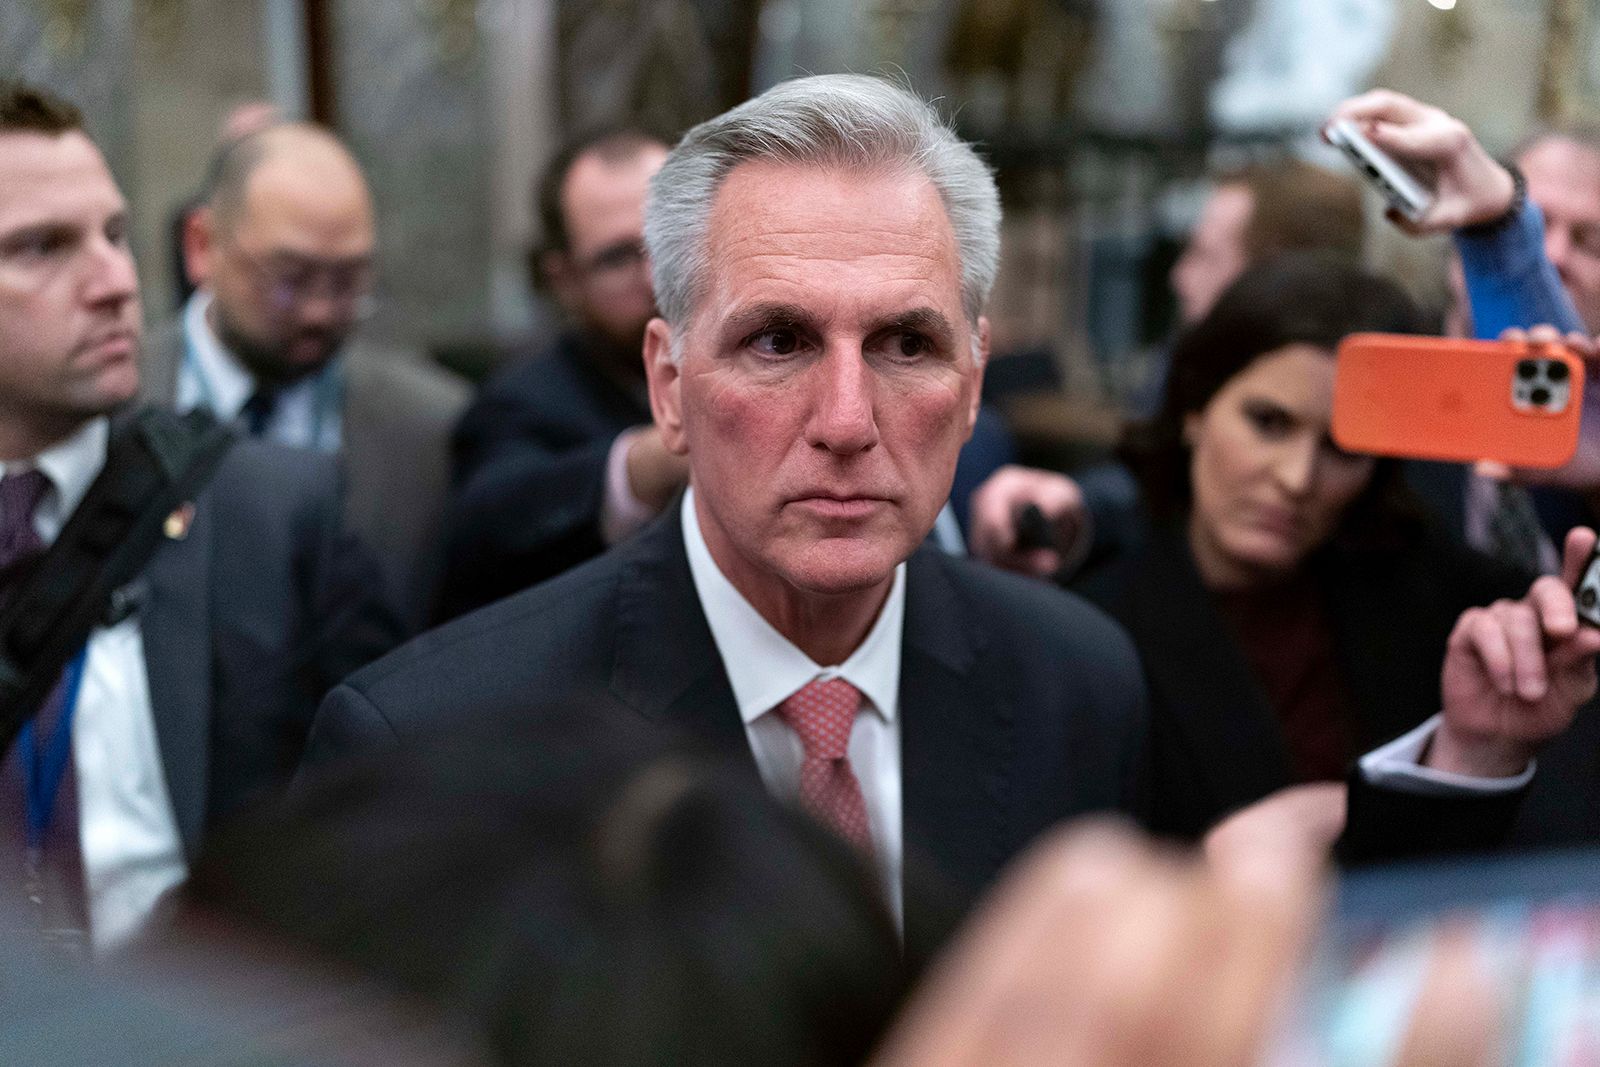 McCarthy is being consumed by the MAGA politics he helped push